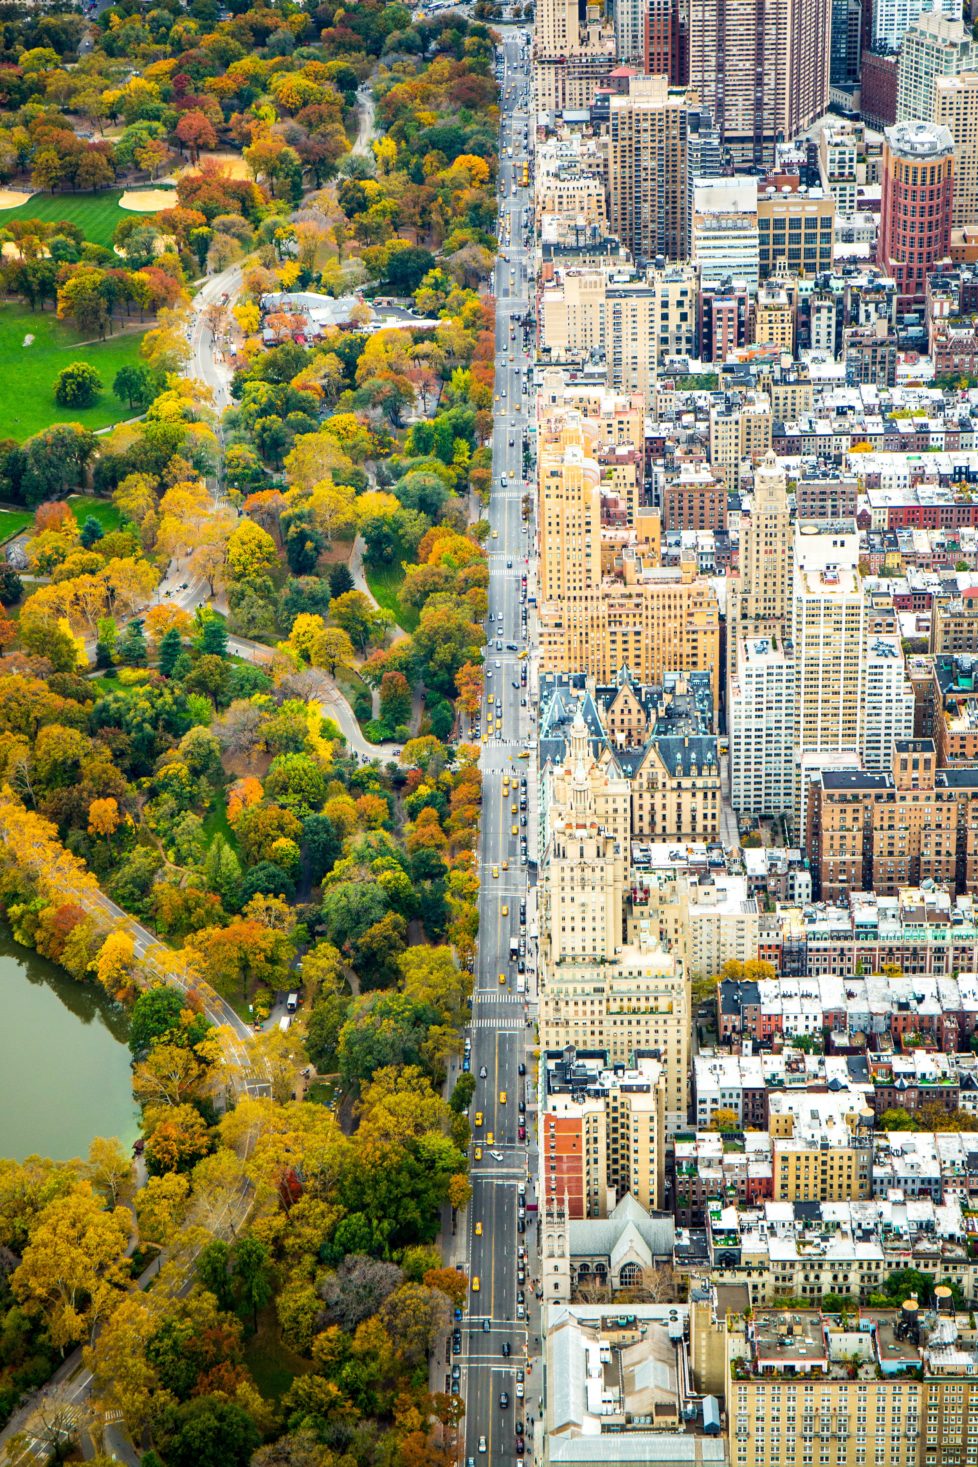 In the helicopter looking south on Central Park West - dividing the architecture and Central park, on November 5th 2014, a day before my 27th birthday. The flight was my birthday gift. Taken with Canon 5D Mark iii & EF24-70mm f/4L IS USM - edited in Adobe Lightroom (I previously incorrectly had this as Park Ave)